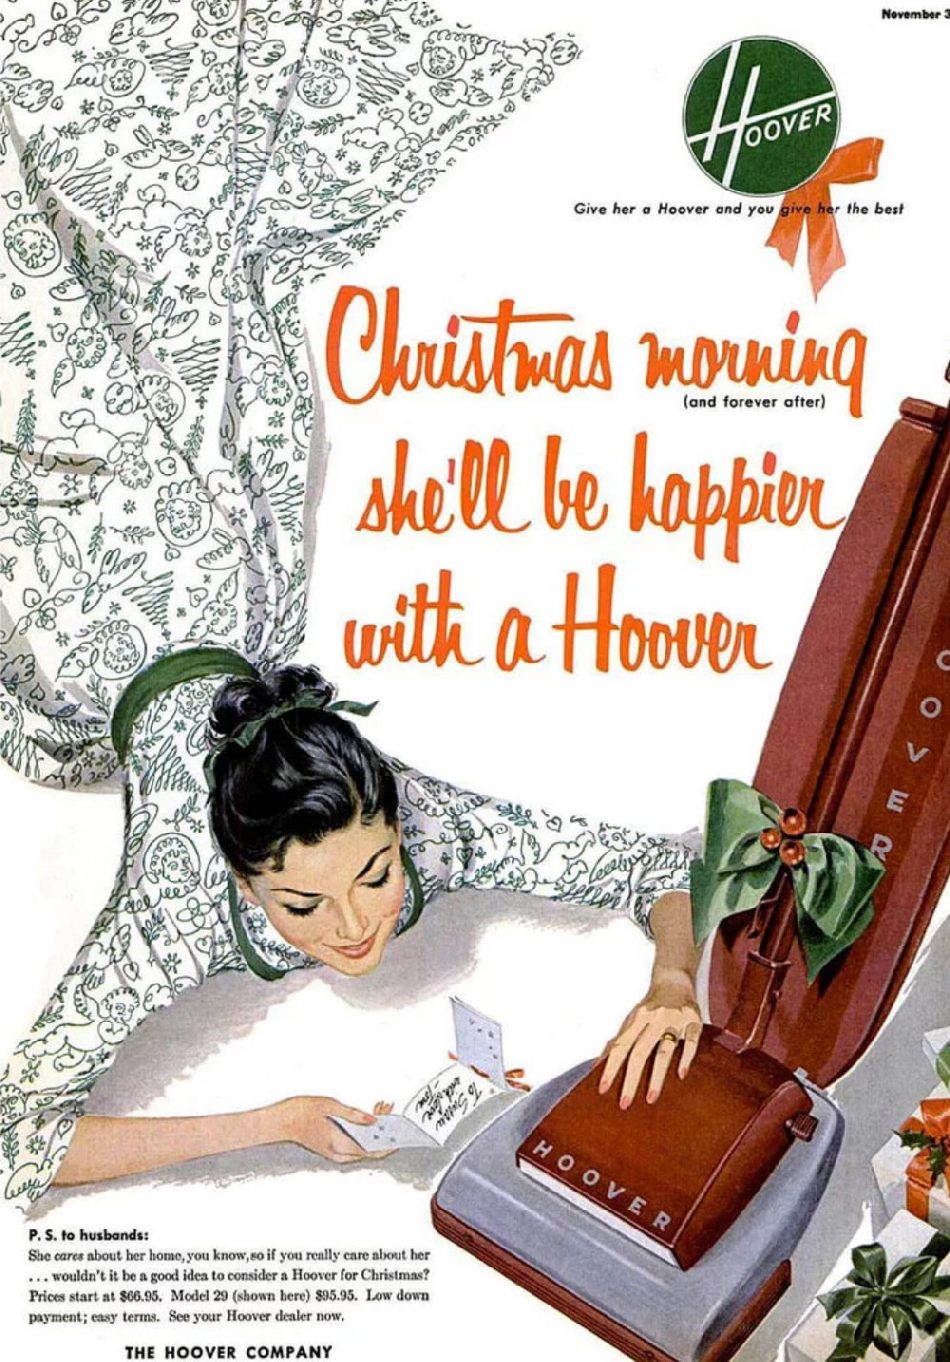 Christmas morning she'll be happier married to the Hoover.